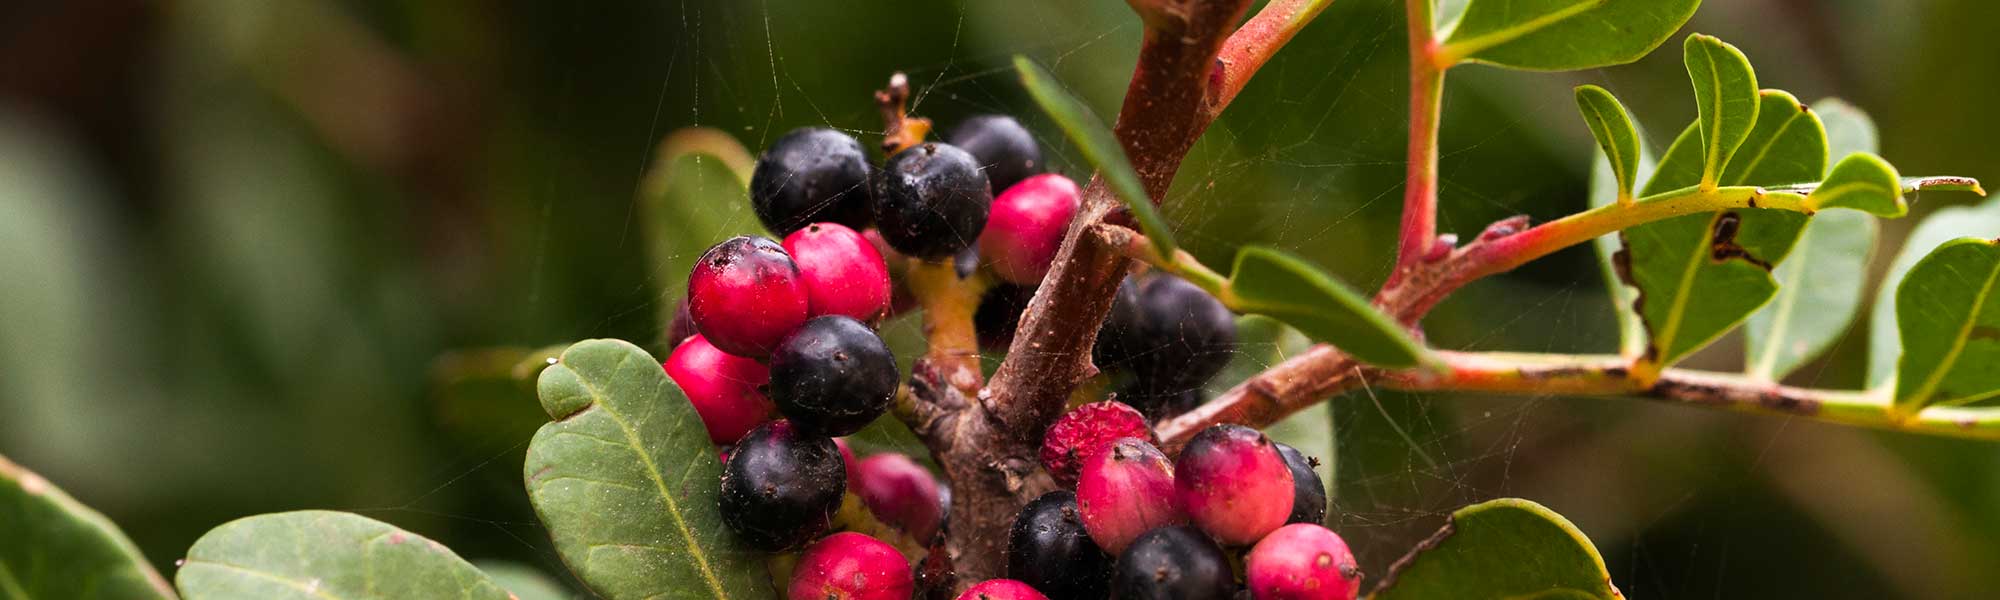 A photo of some redberries and blackberries